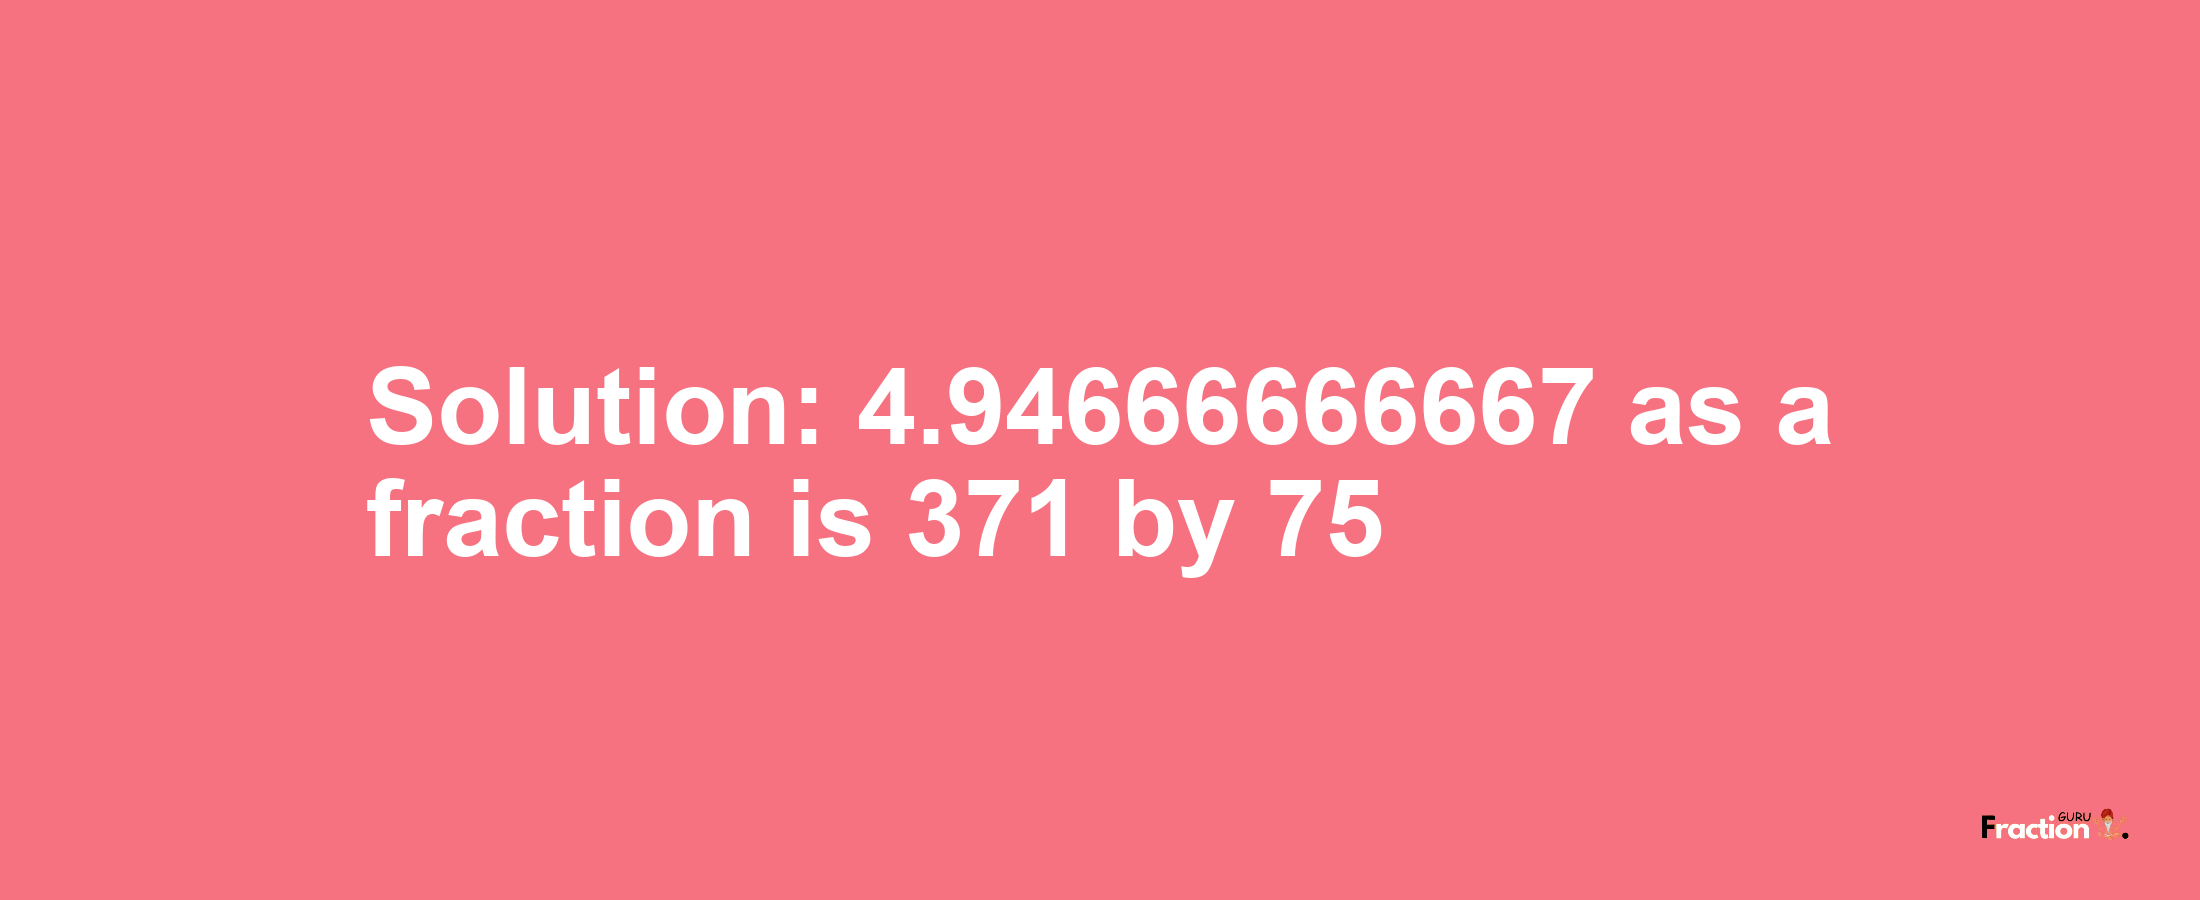 Solution:4.94666666667 as a fraction is 371/75